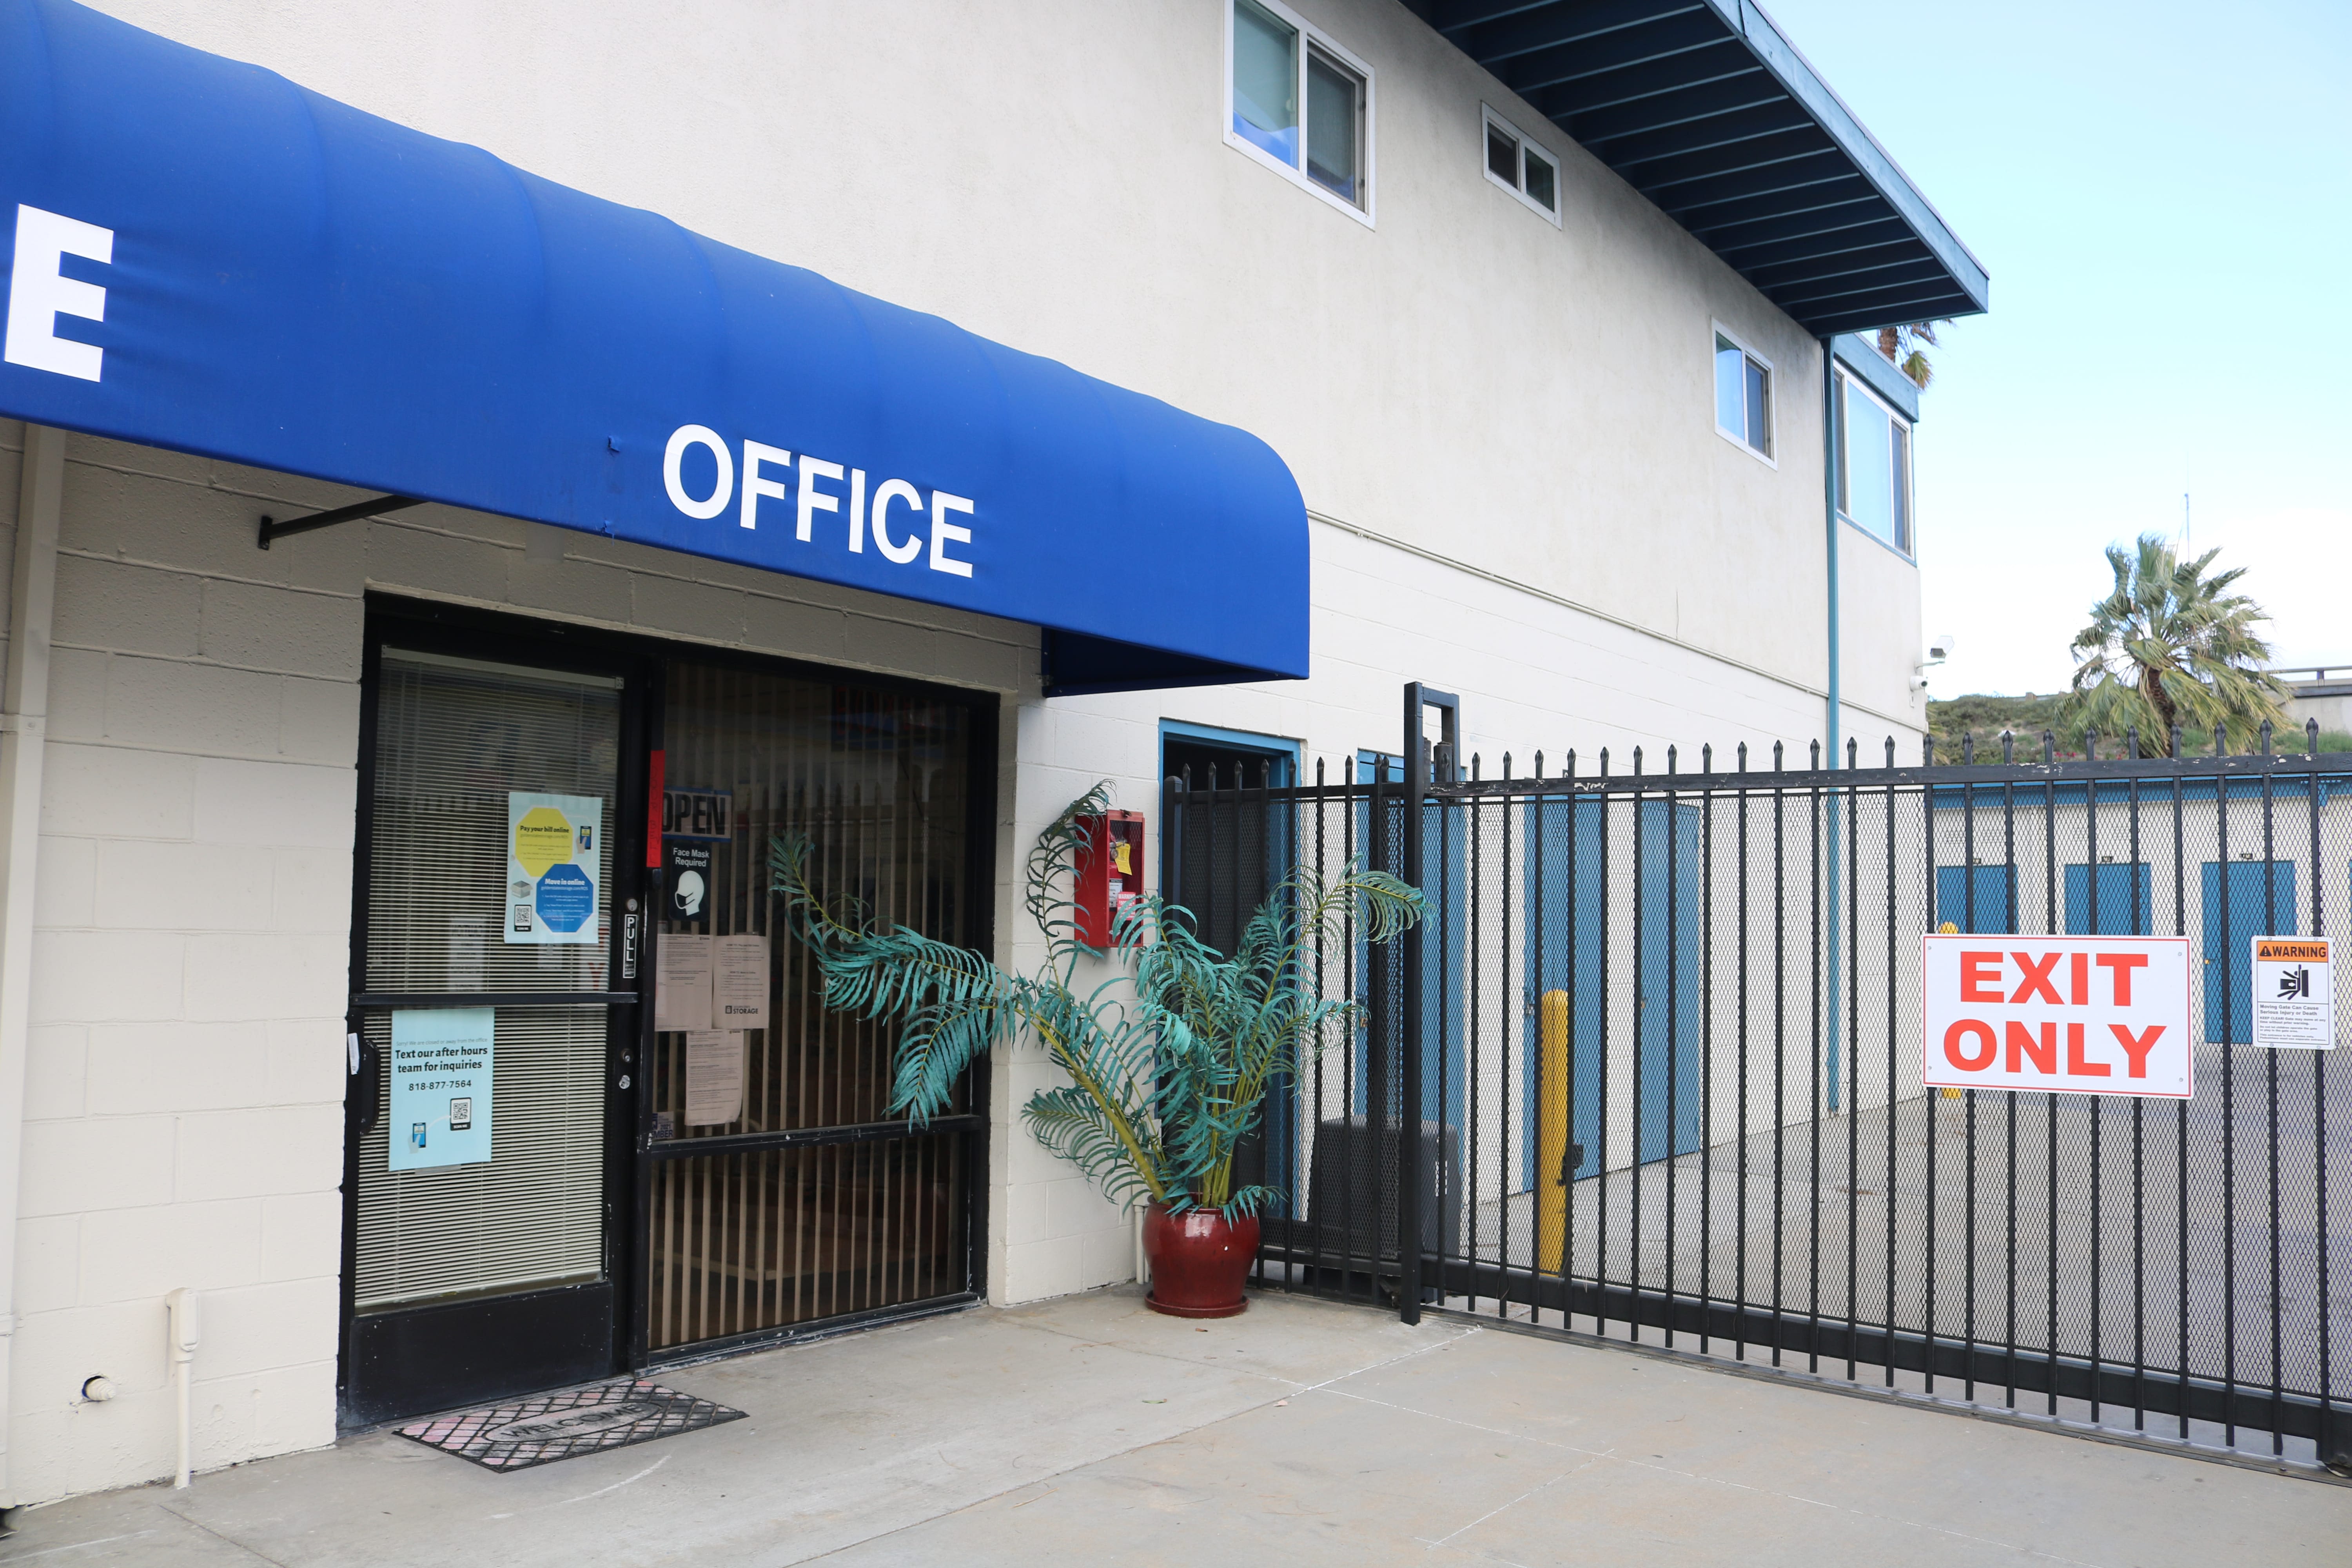 The doors to the main office at Golden State Storage - Roscoe in North Hills, California